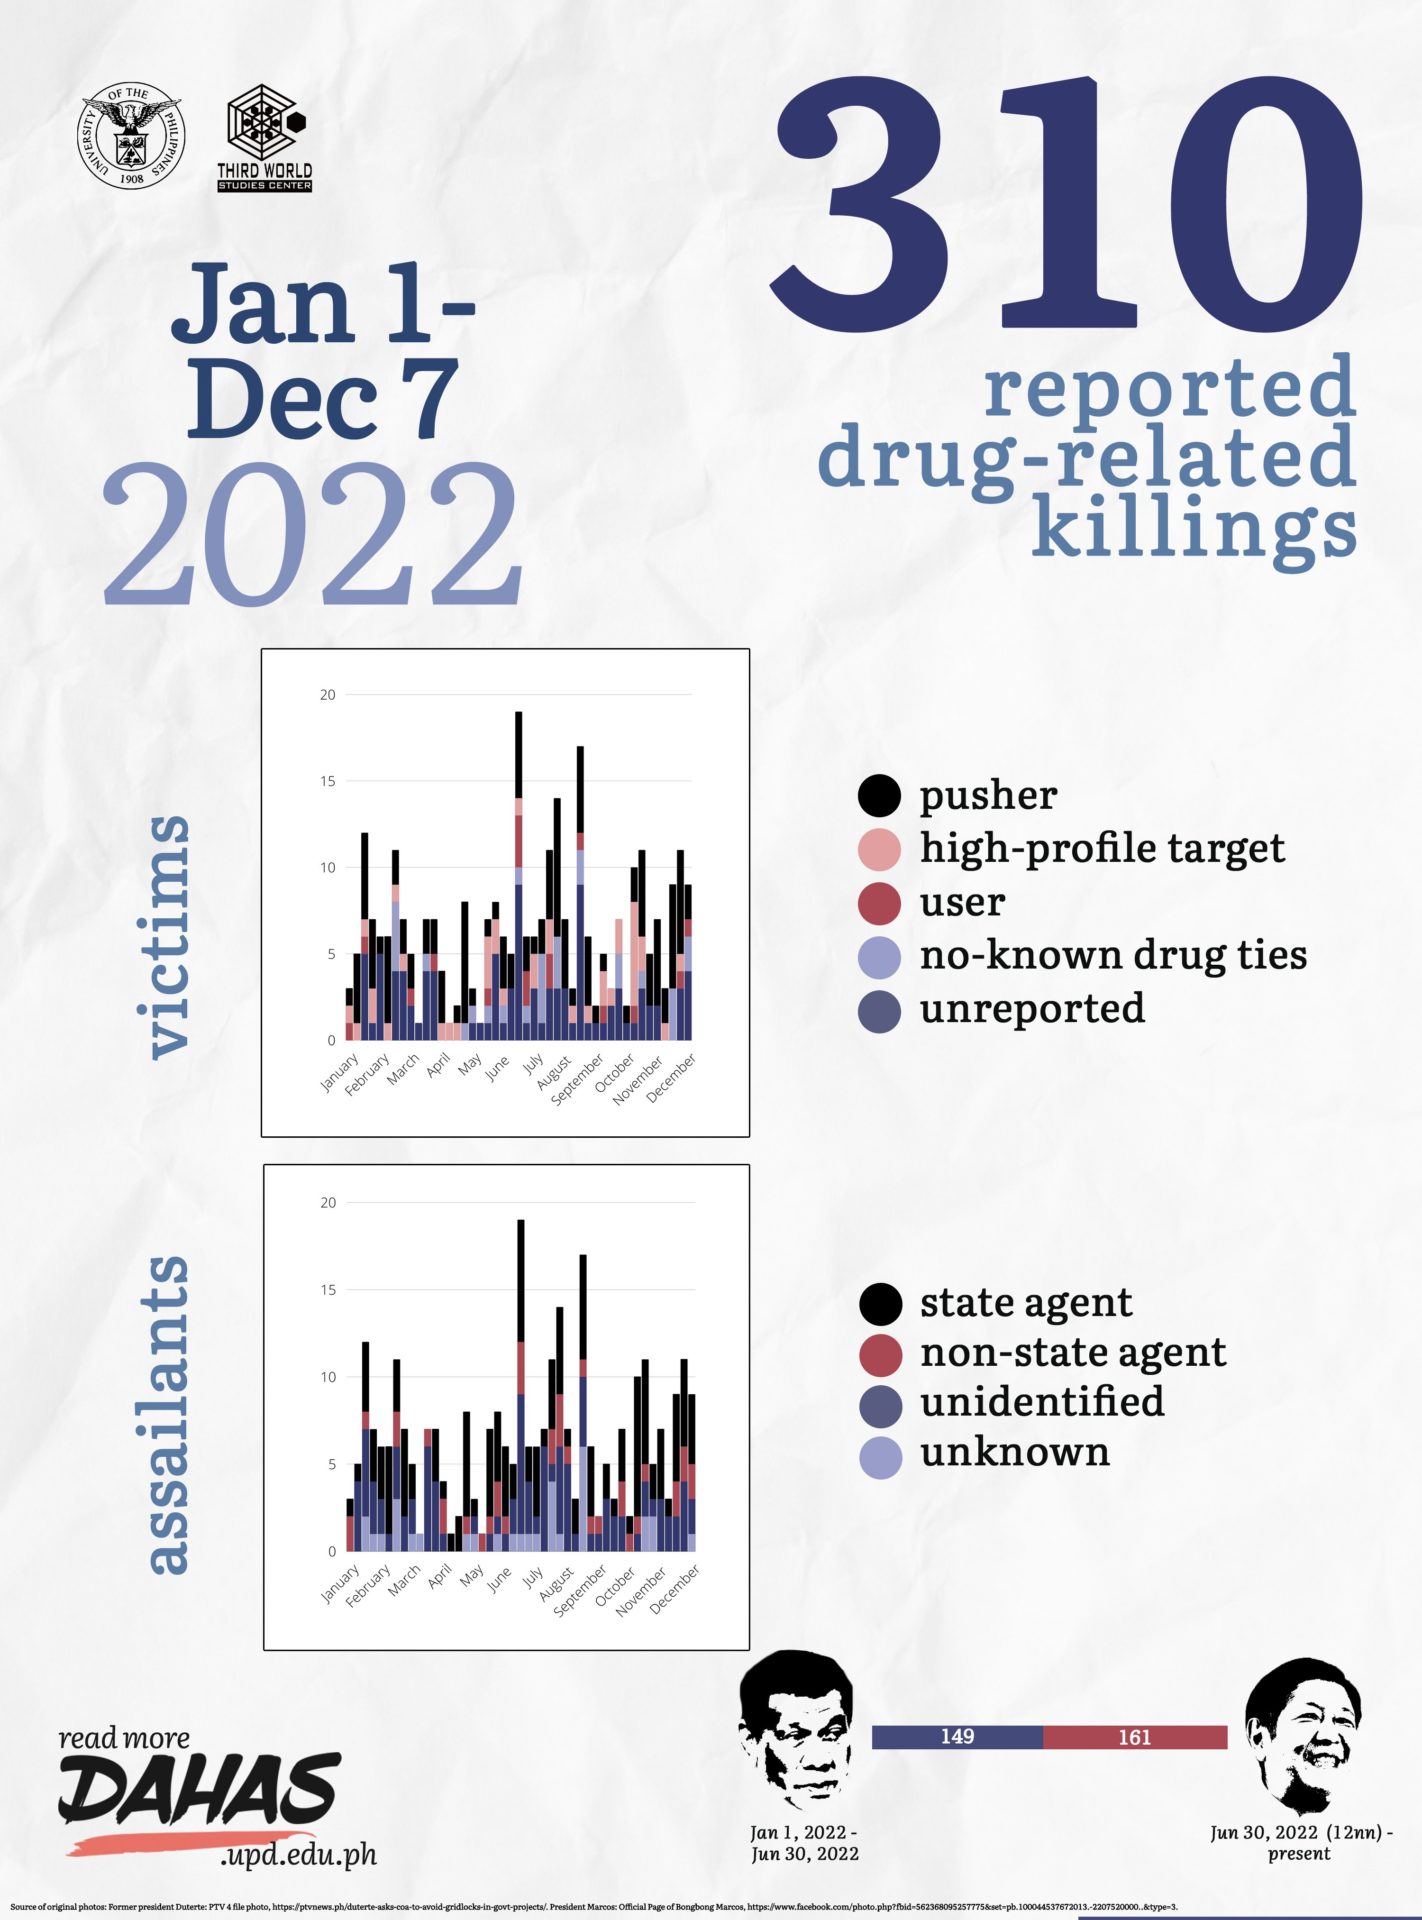 DAHAS-infographic Jan 1 to Dec 7 2022 - 310 drug related killings